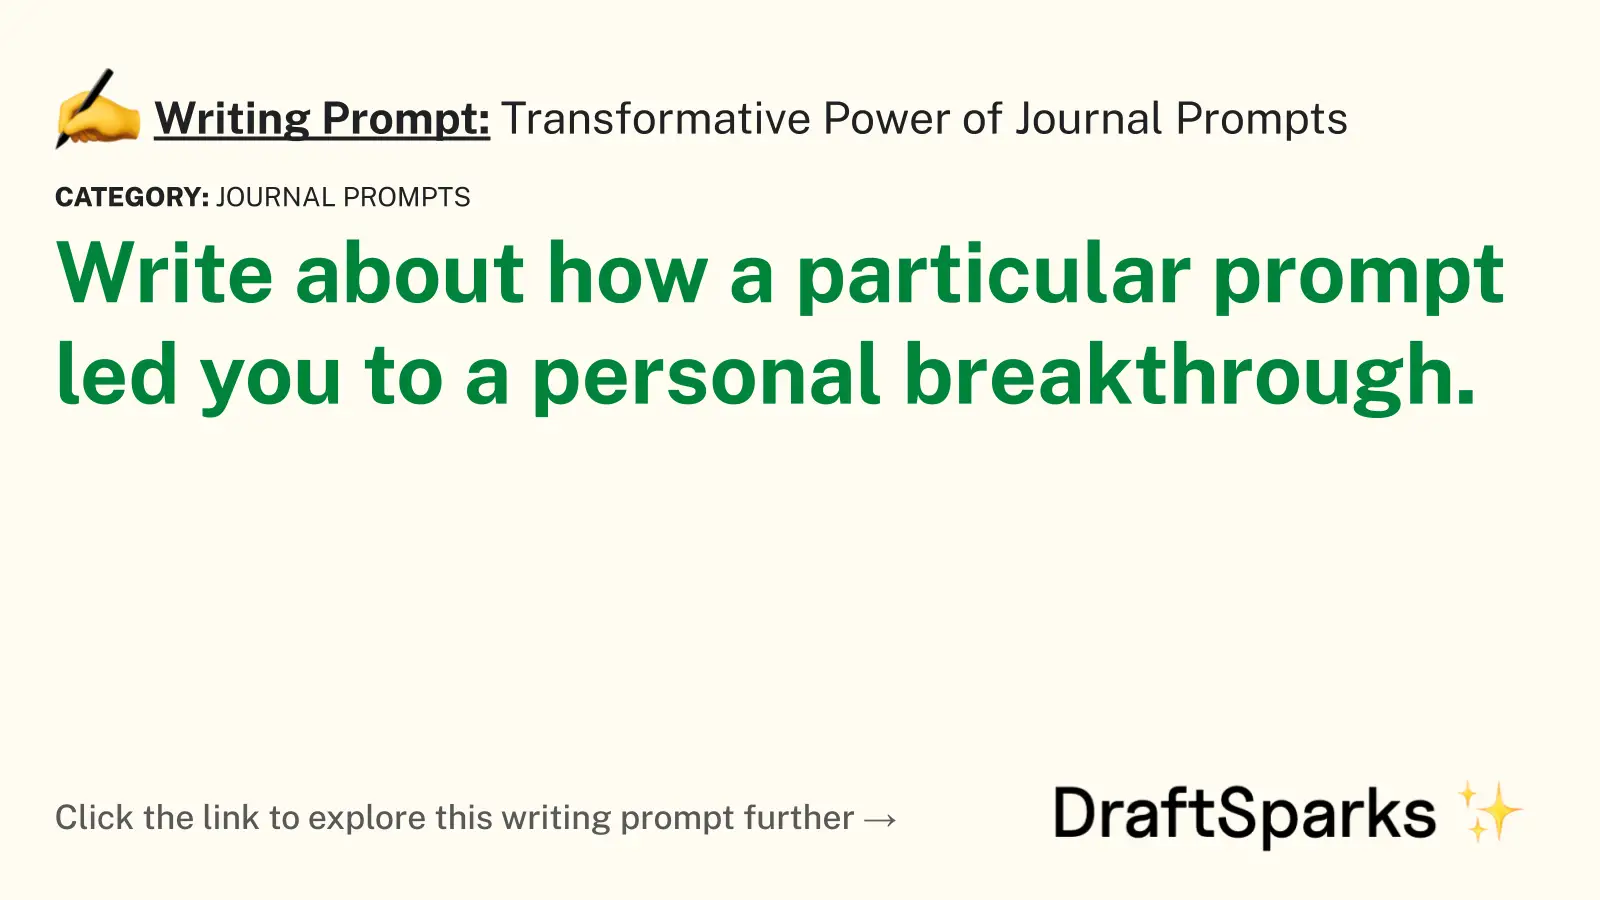 Transformative Power of Journal Prompts